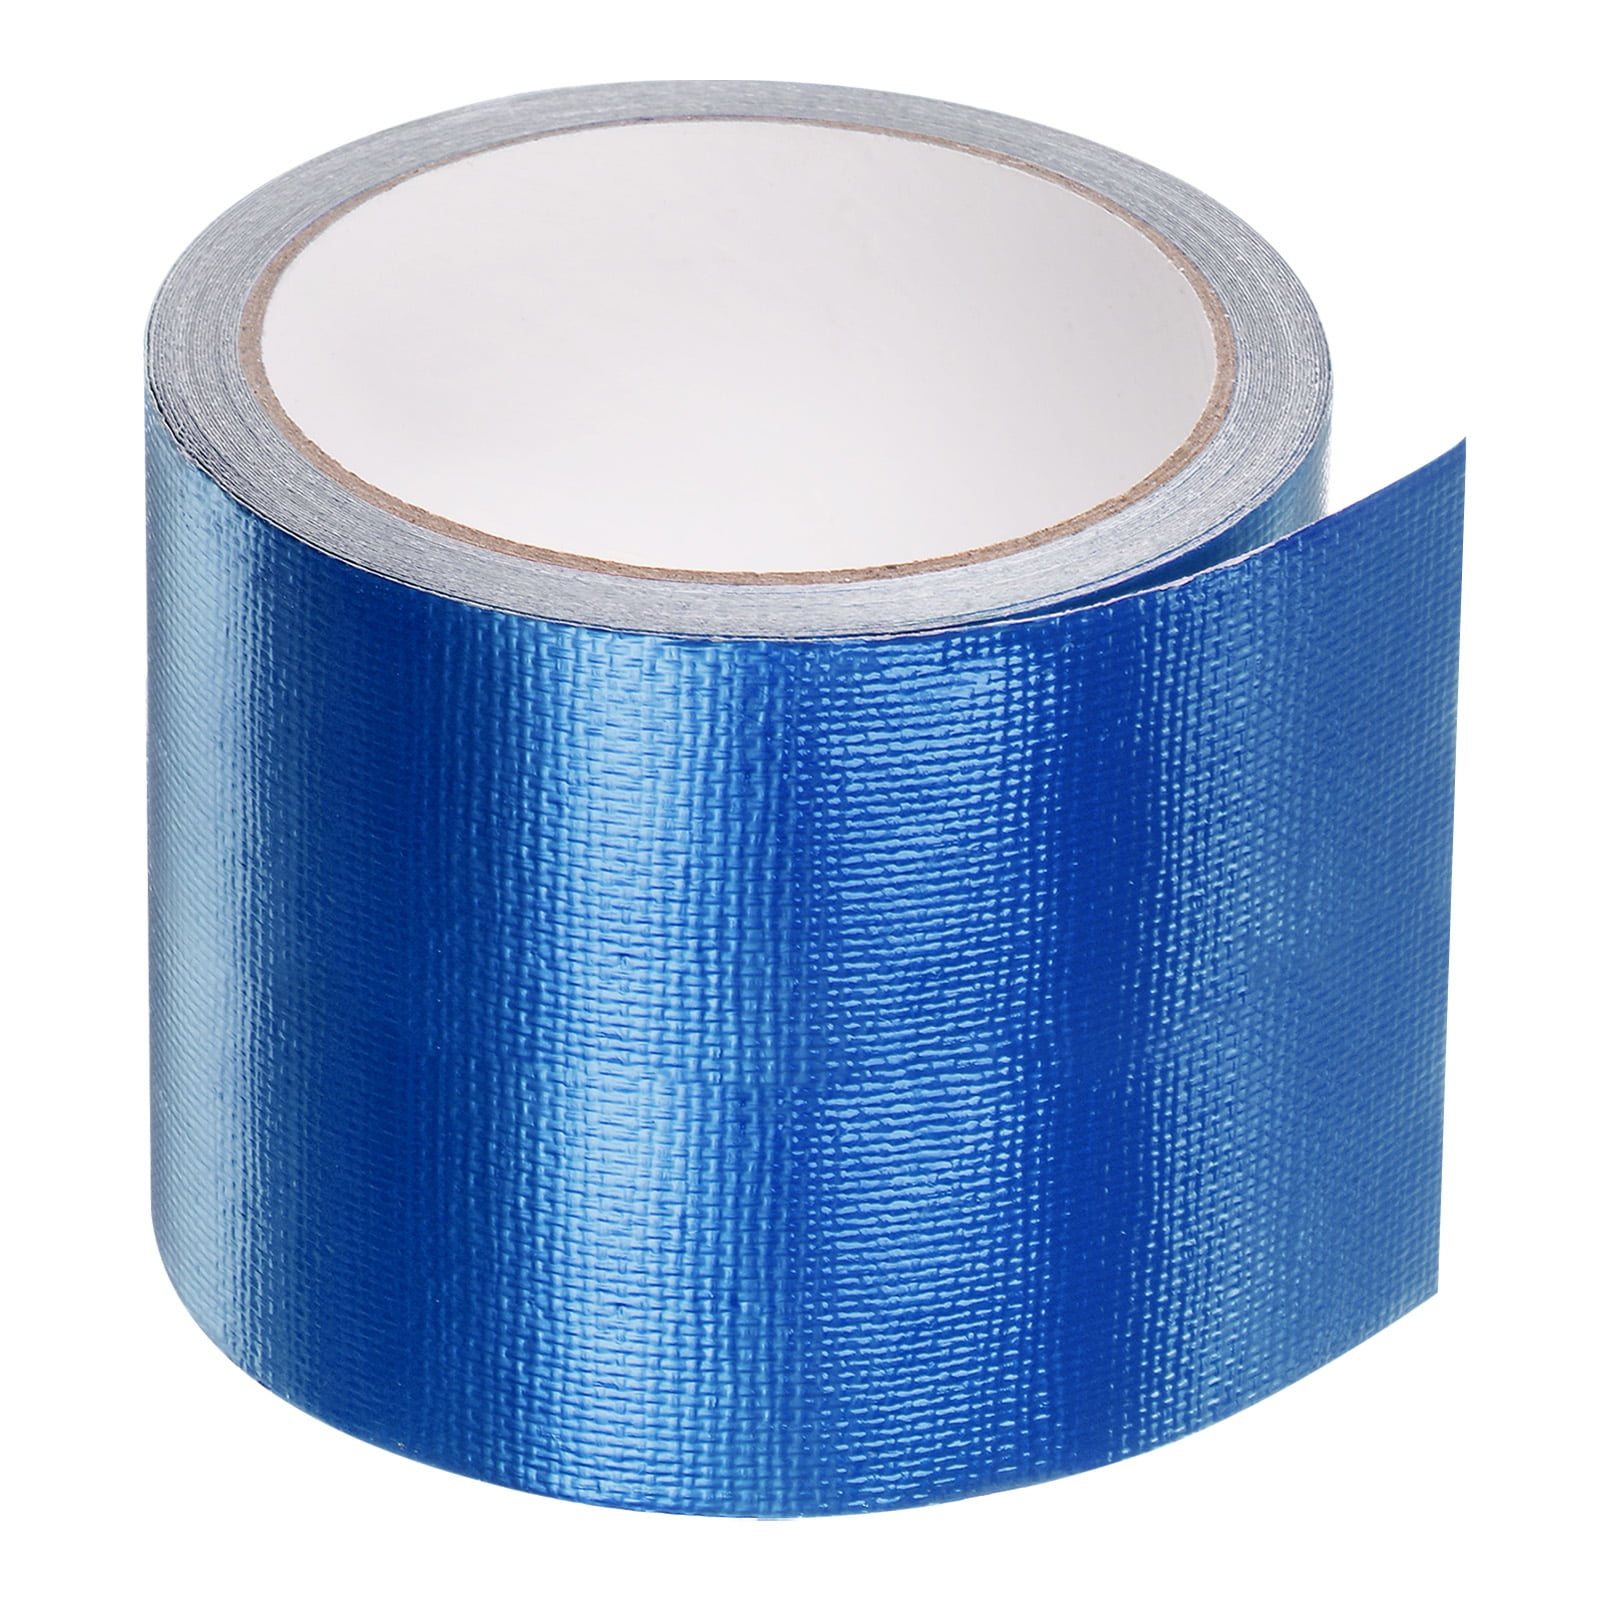 Get Up To 53% OFF Discount on Tarp Repair Tape